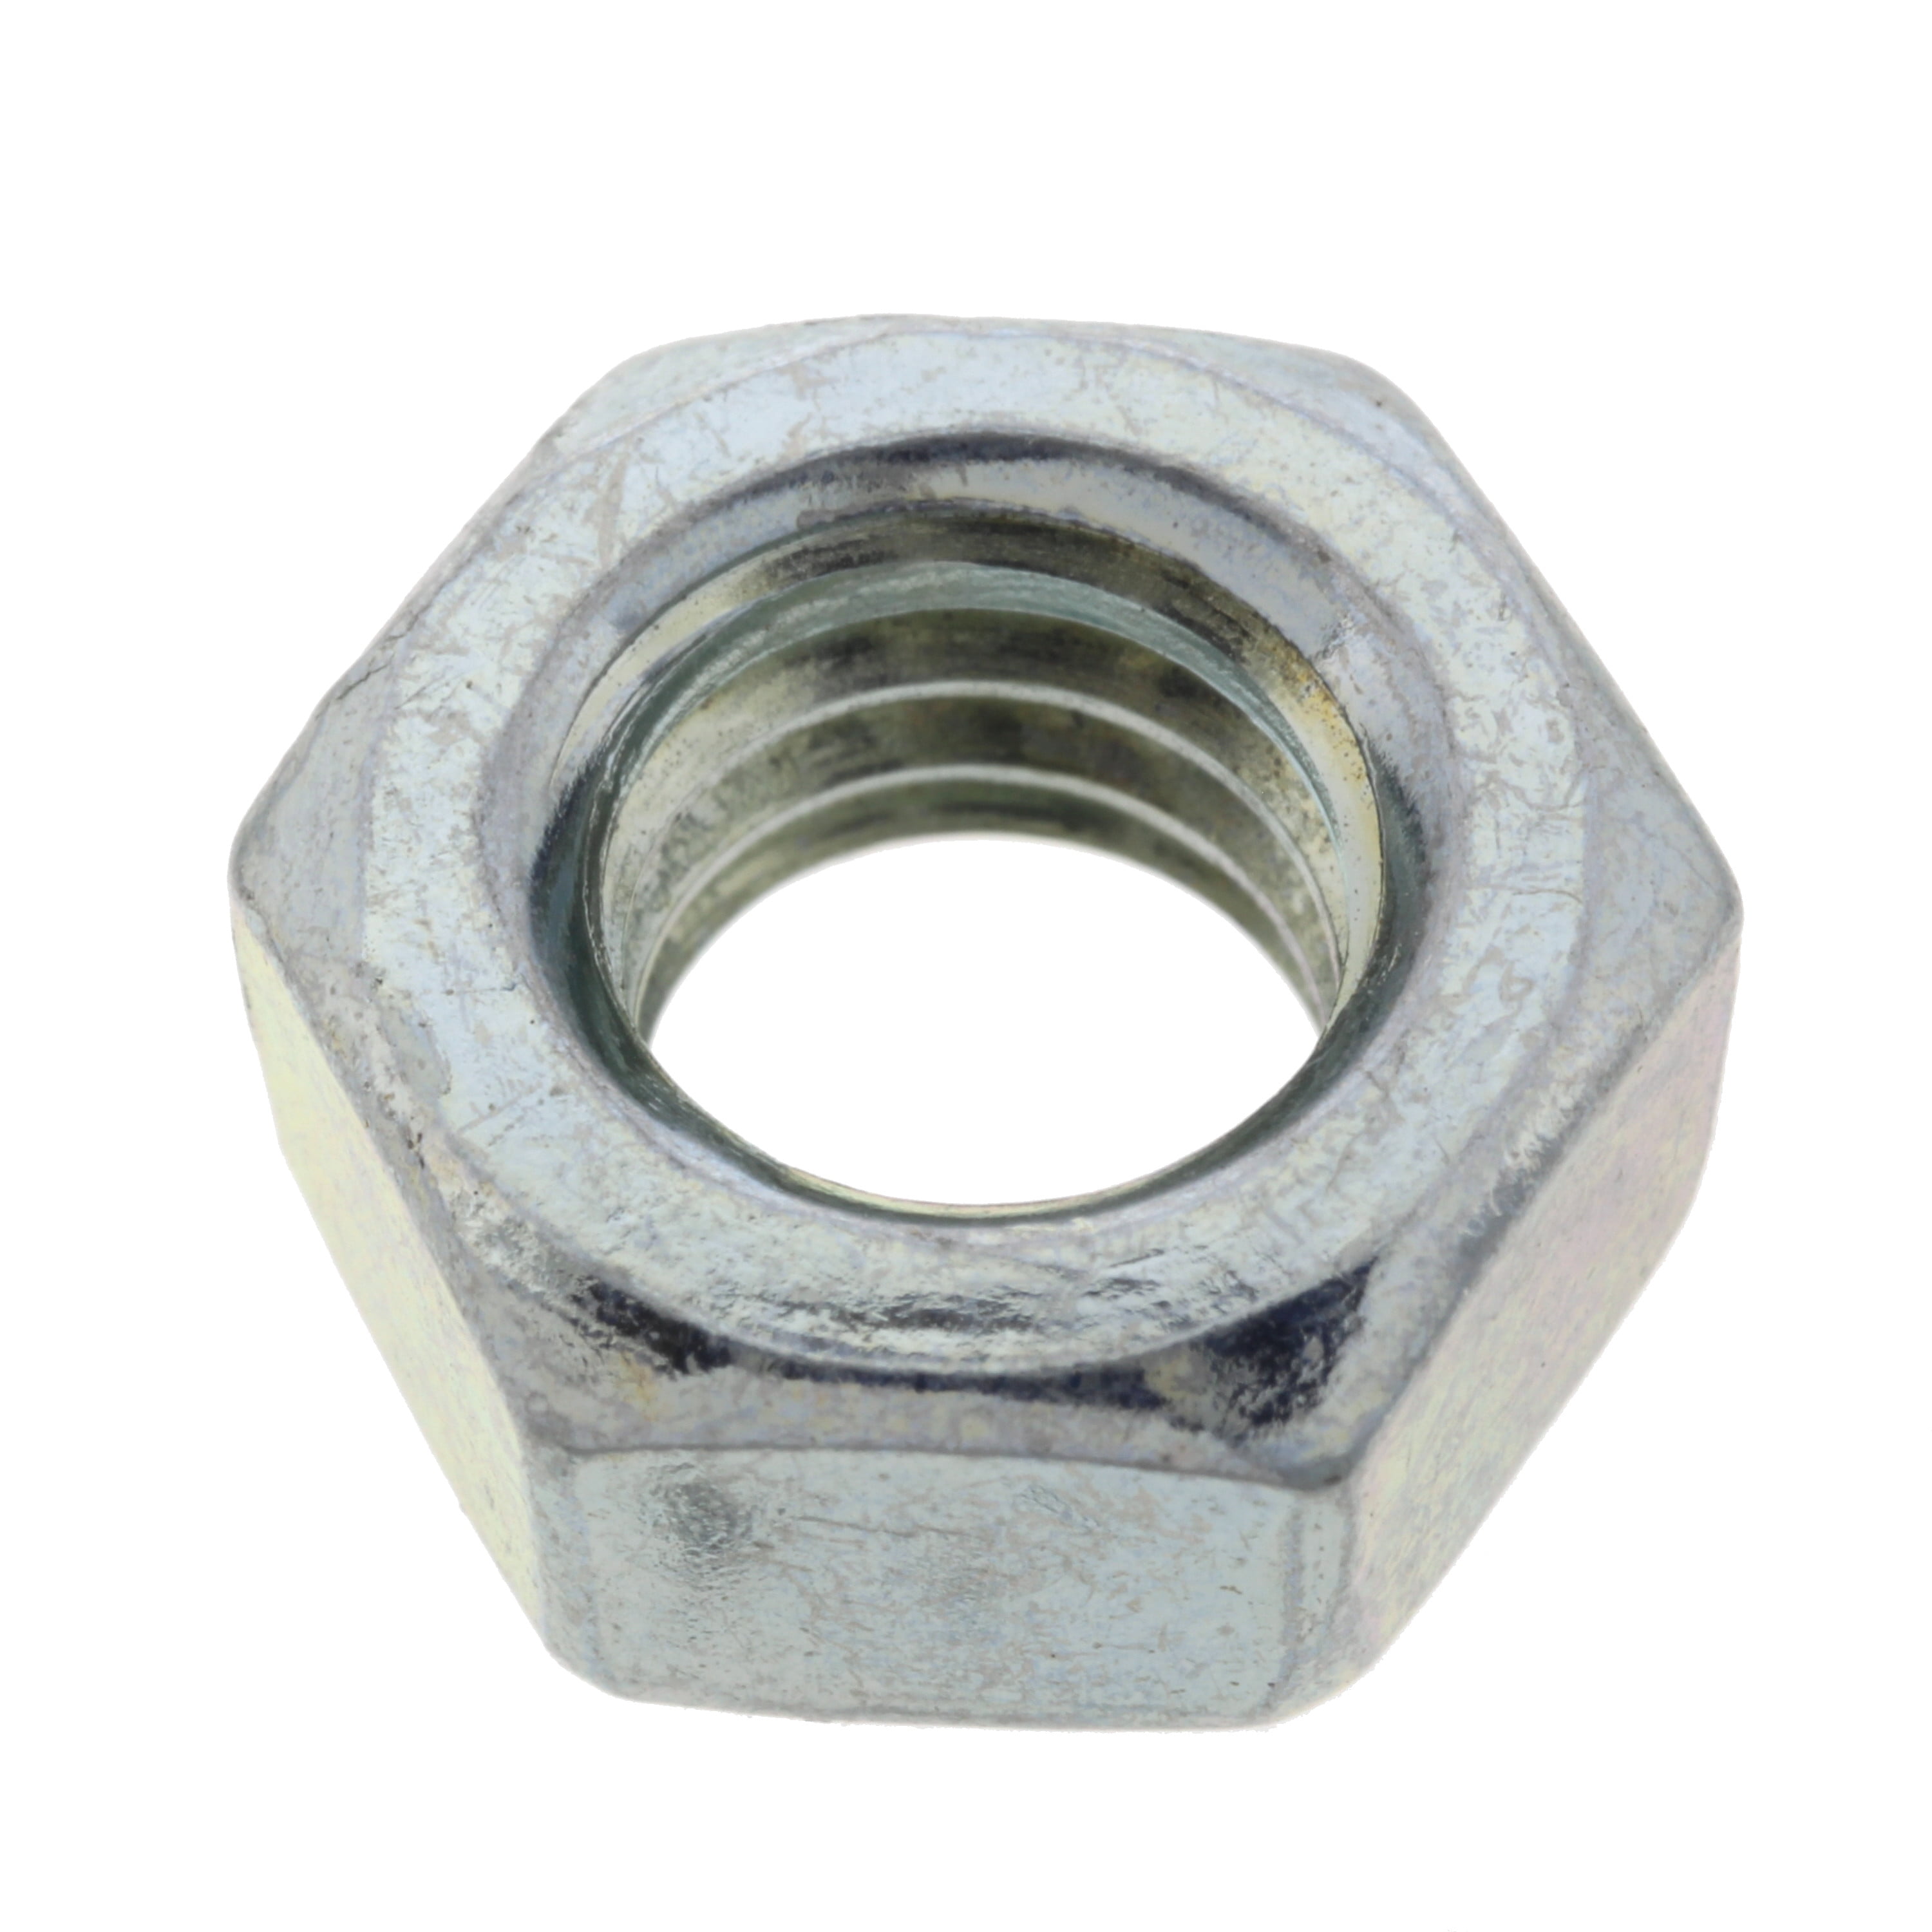 5/16"-18 Grade 5 Finished Hex Nuts Electro Zinc Plated Steel Qty 100 